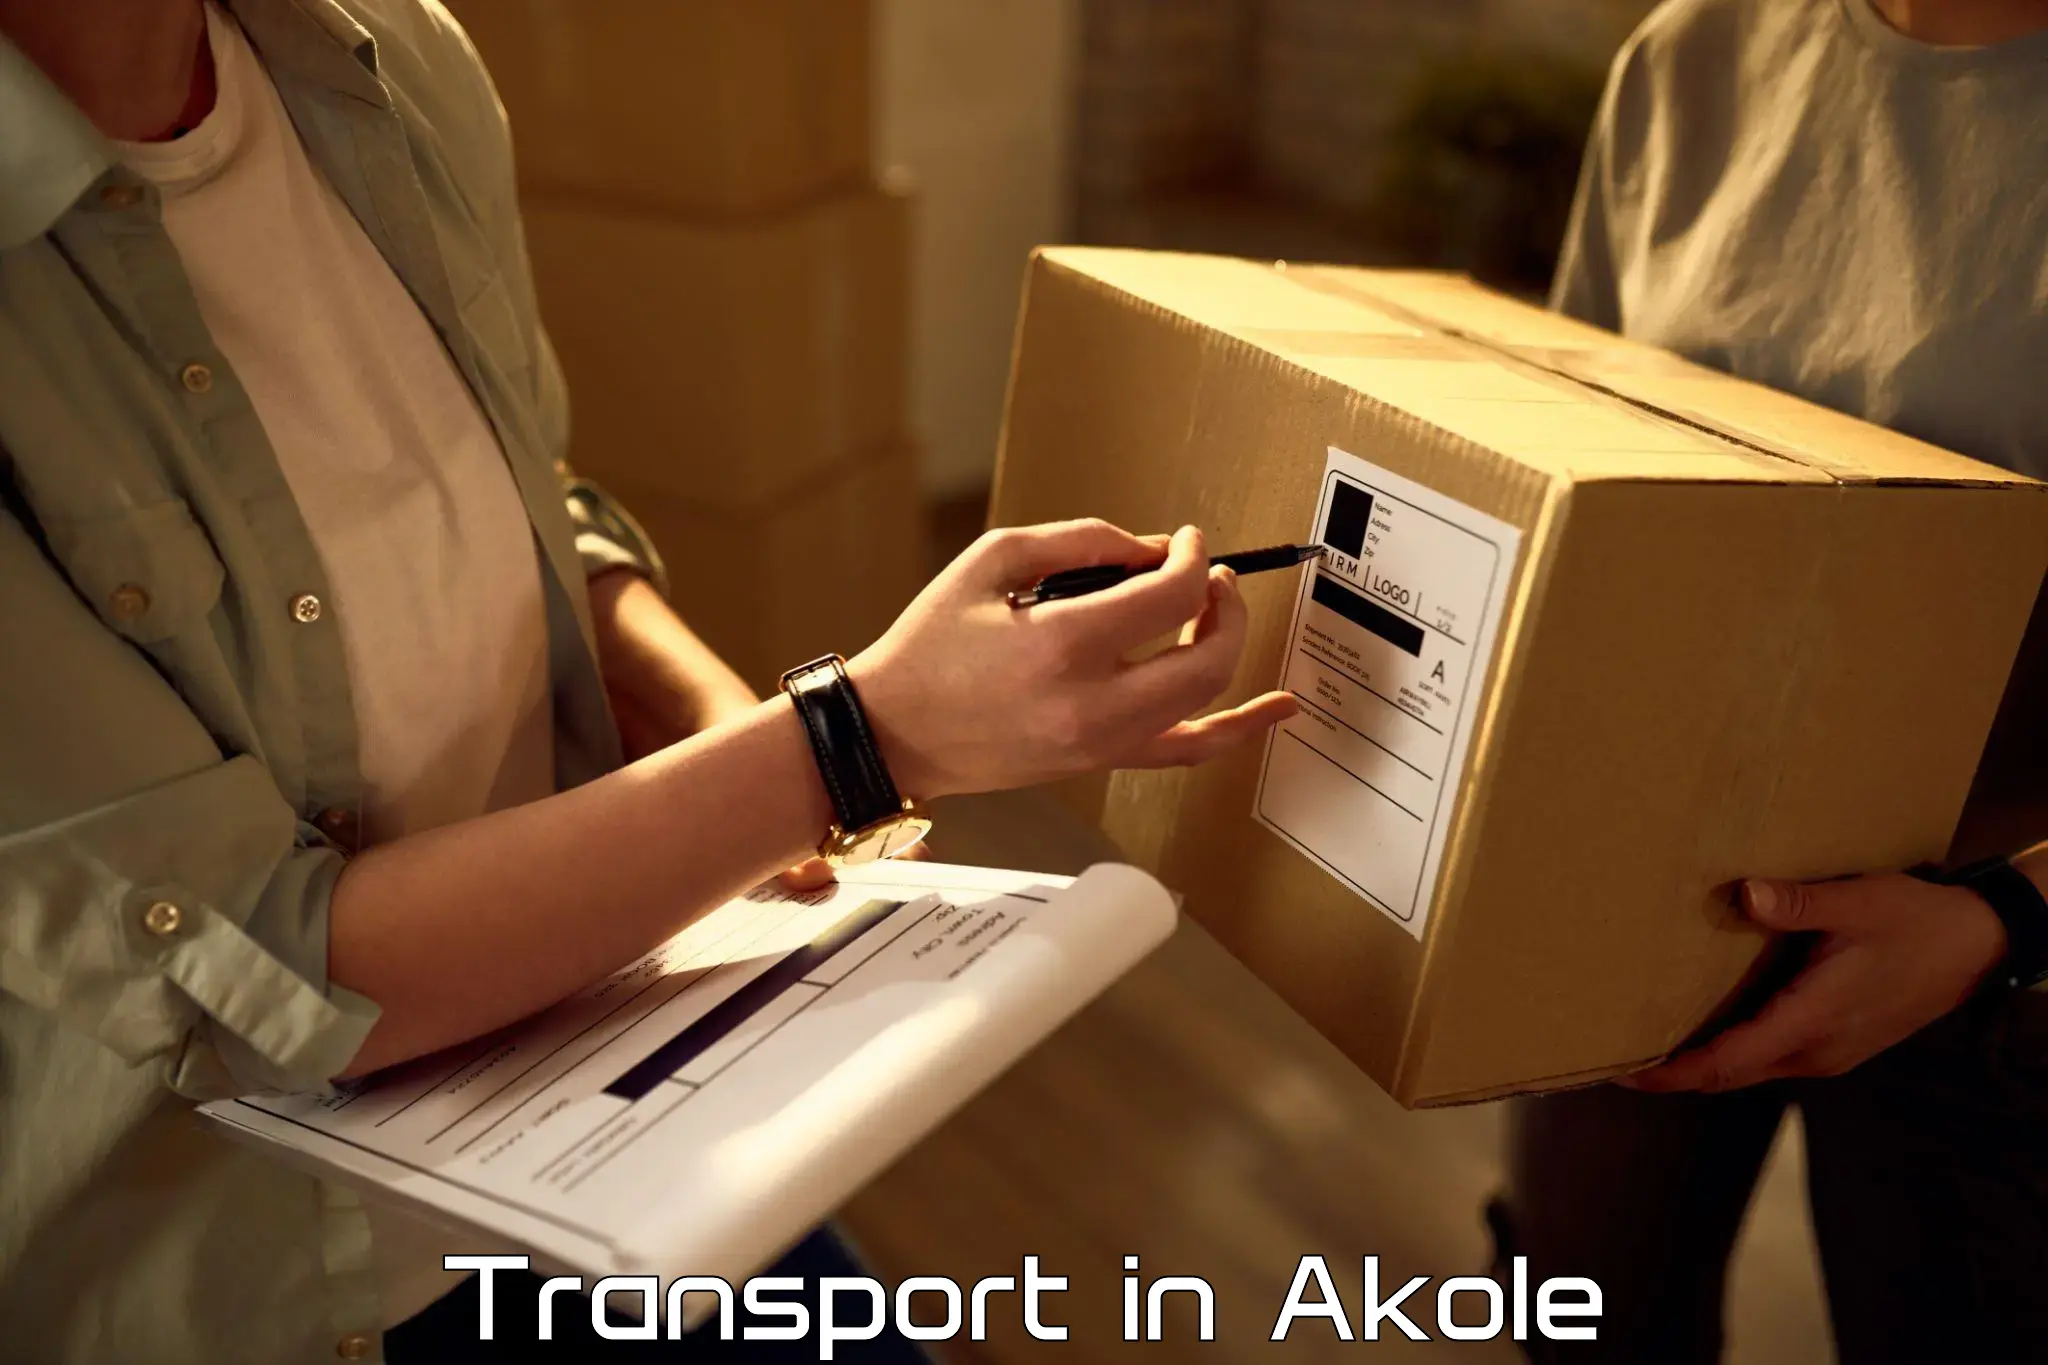 Transportation solution services in Akole